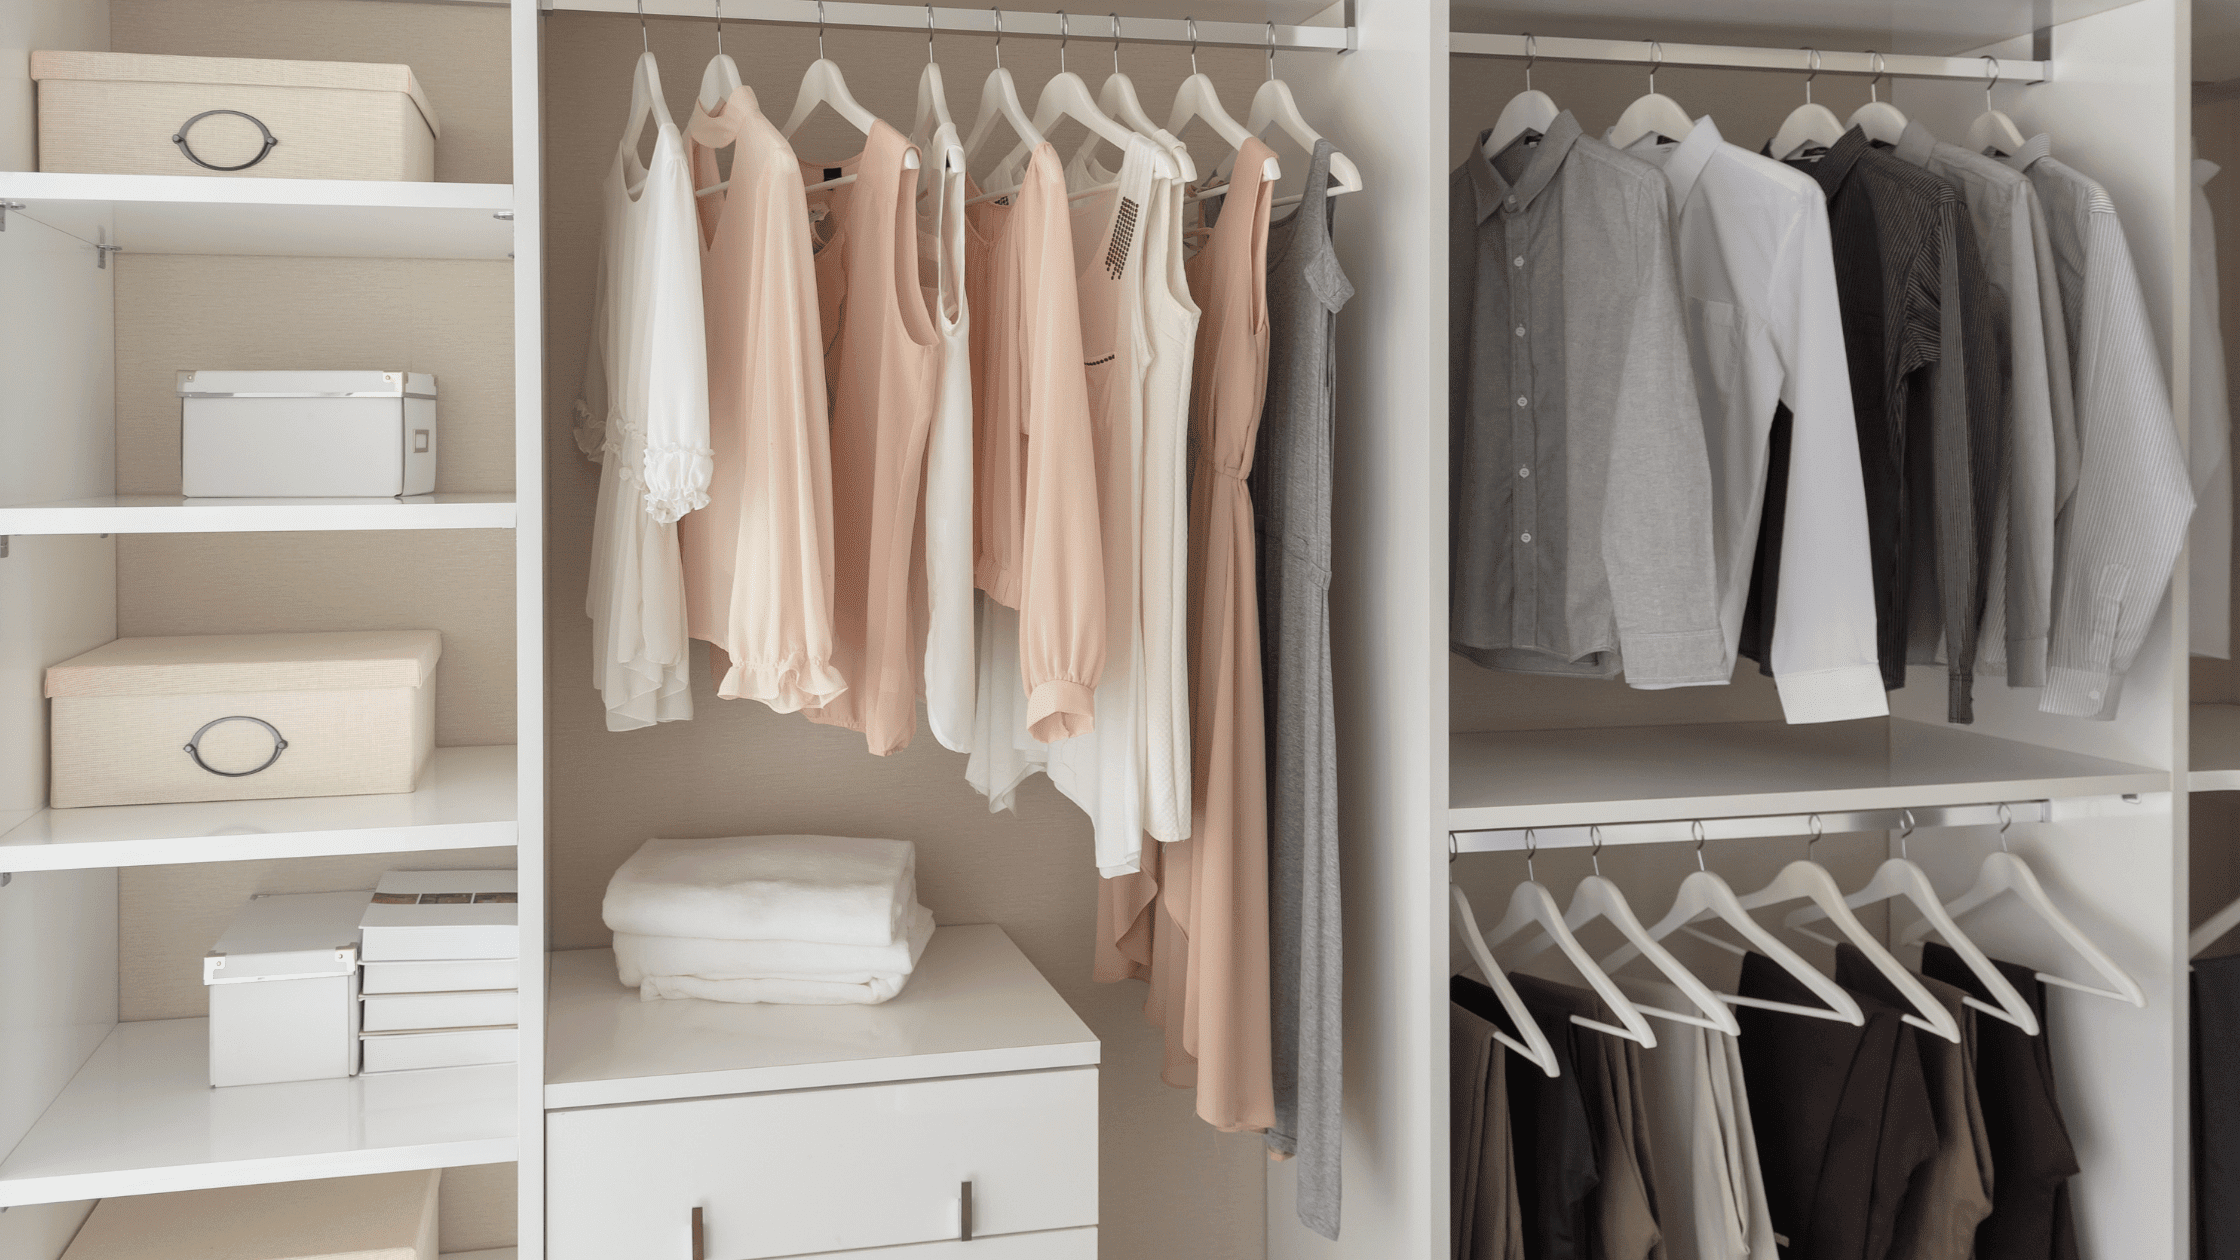 How To Soundproof Closet